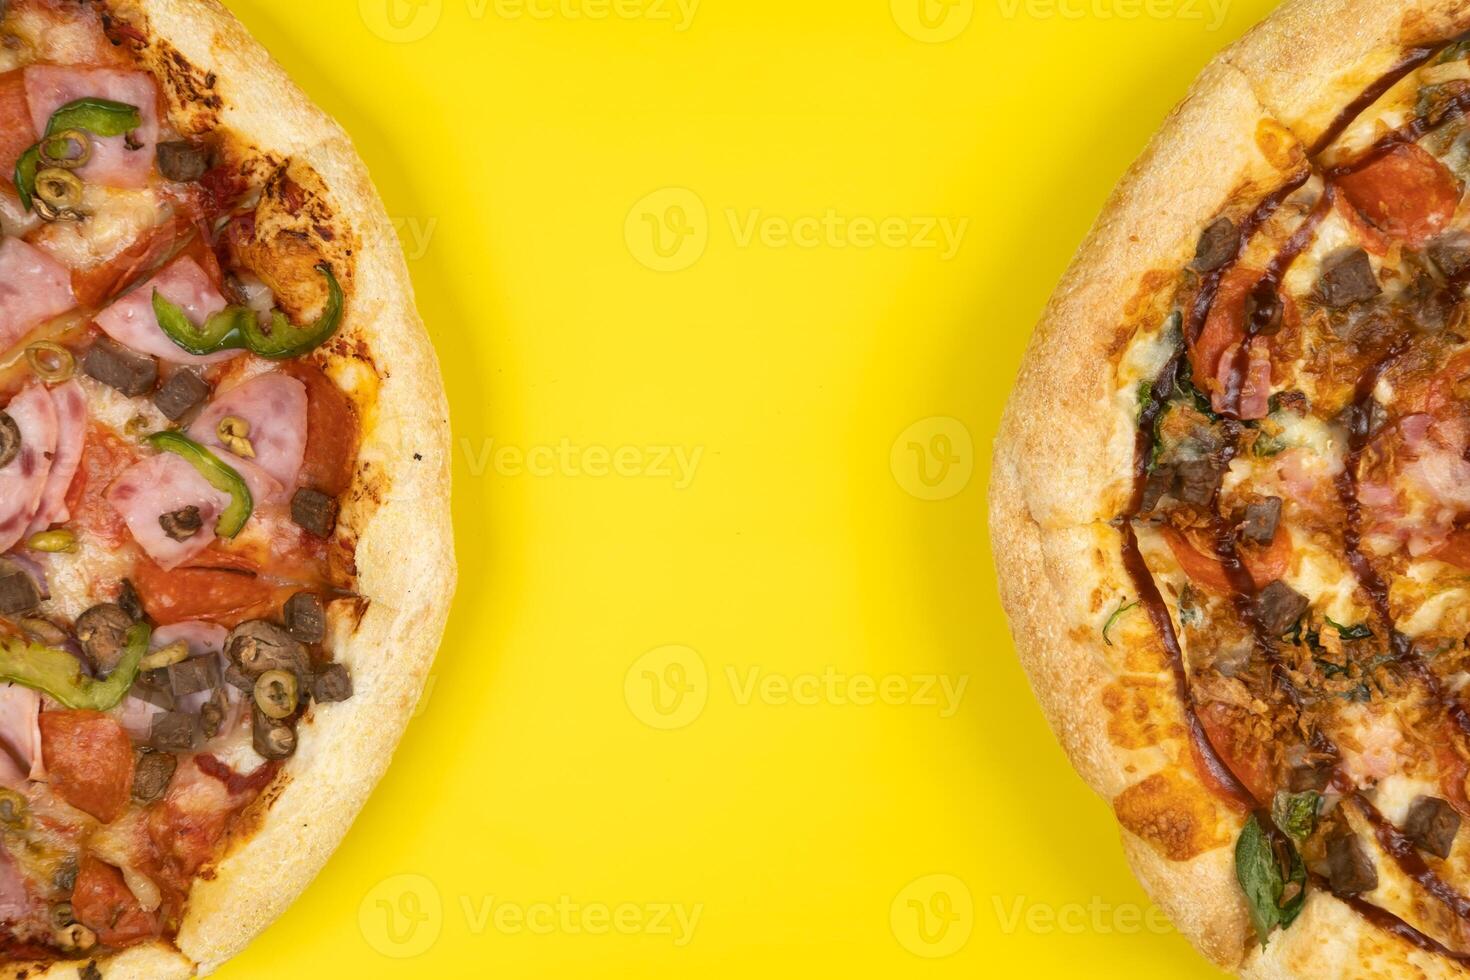 Two different Delicious big pizzas on a yellow background photo